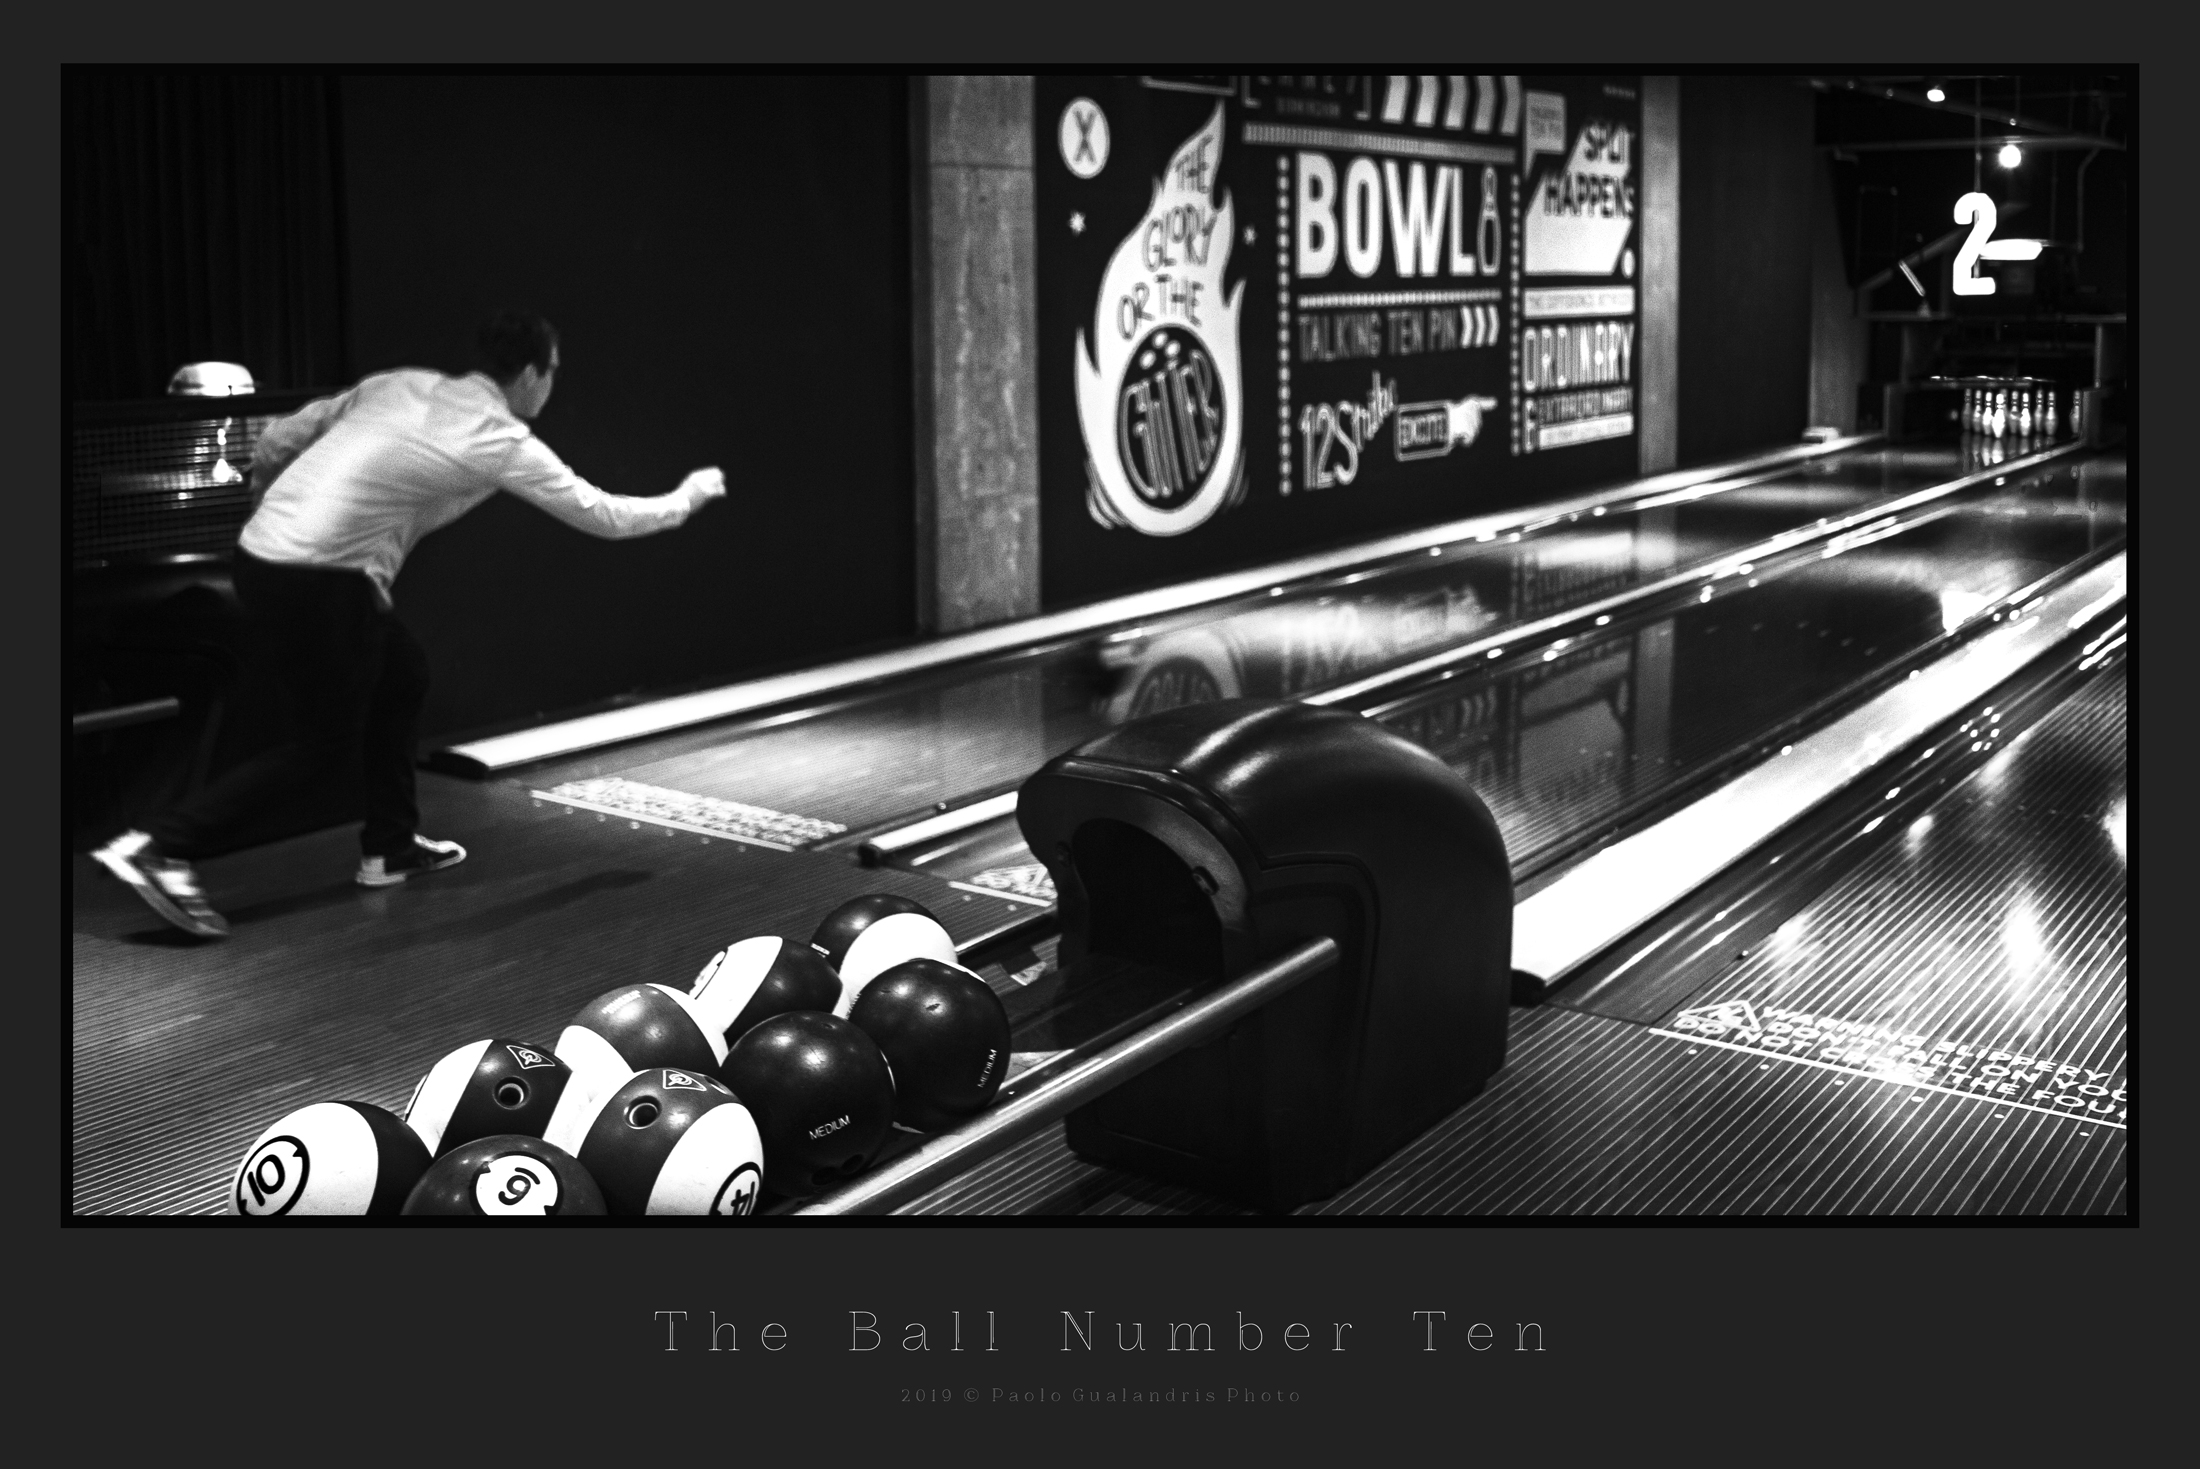 The Ball Number Ten...